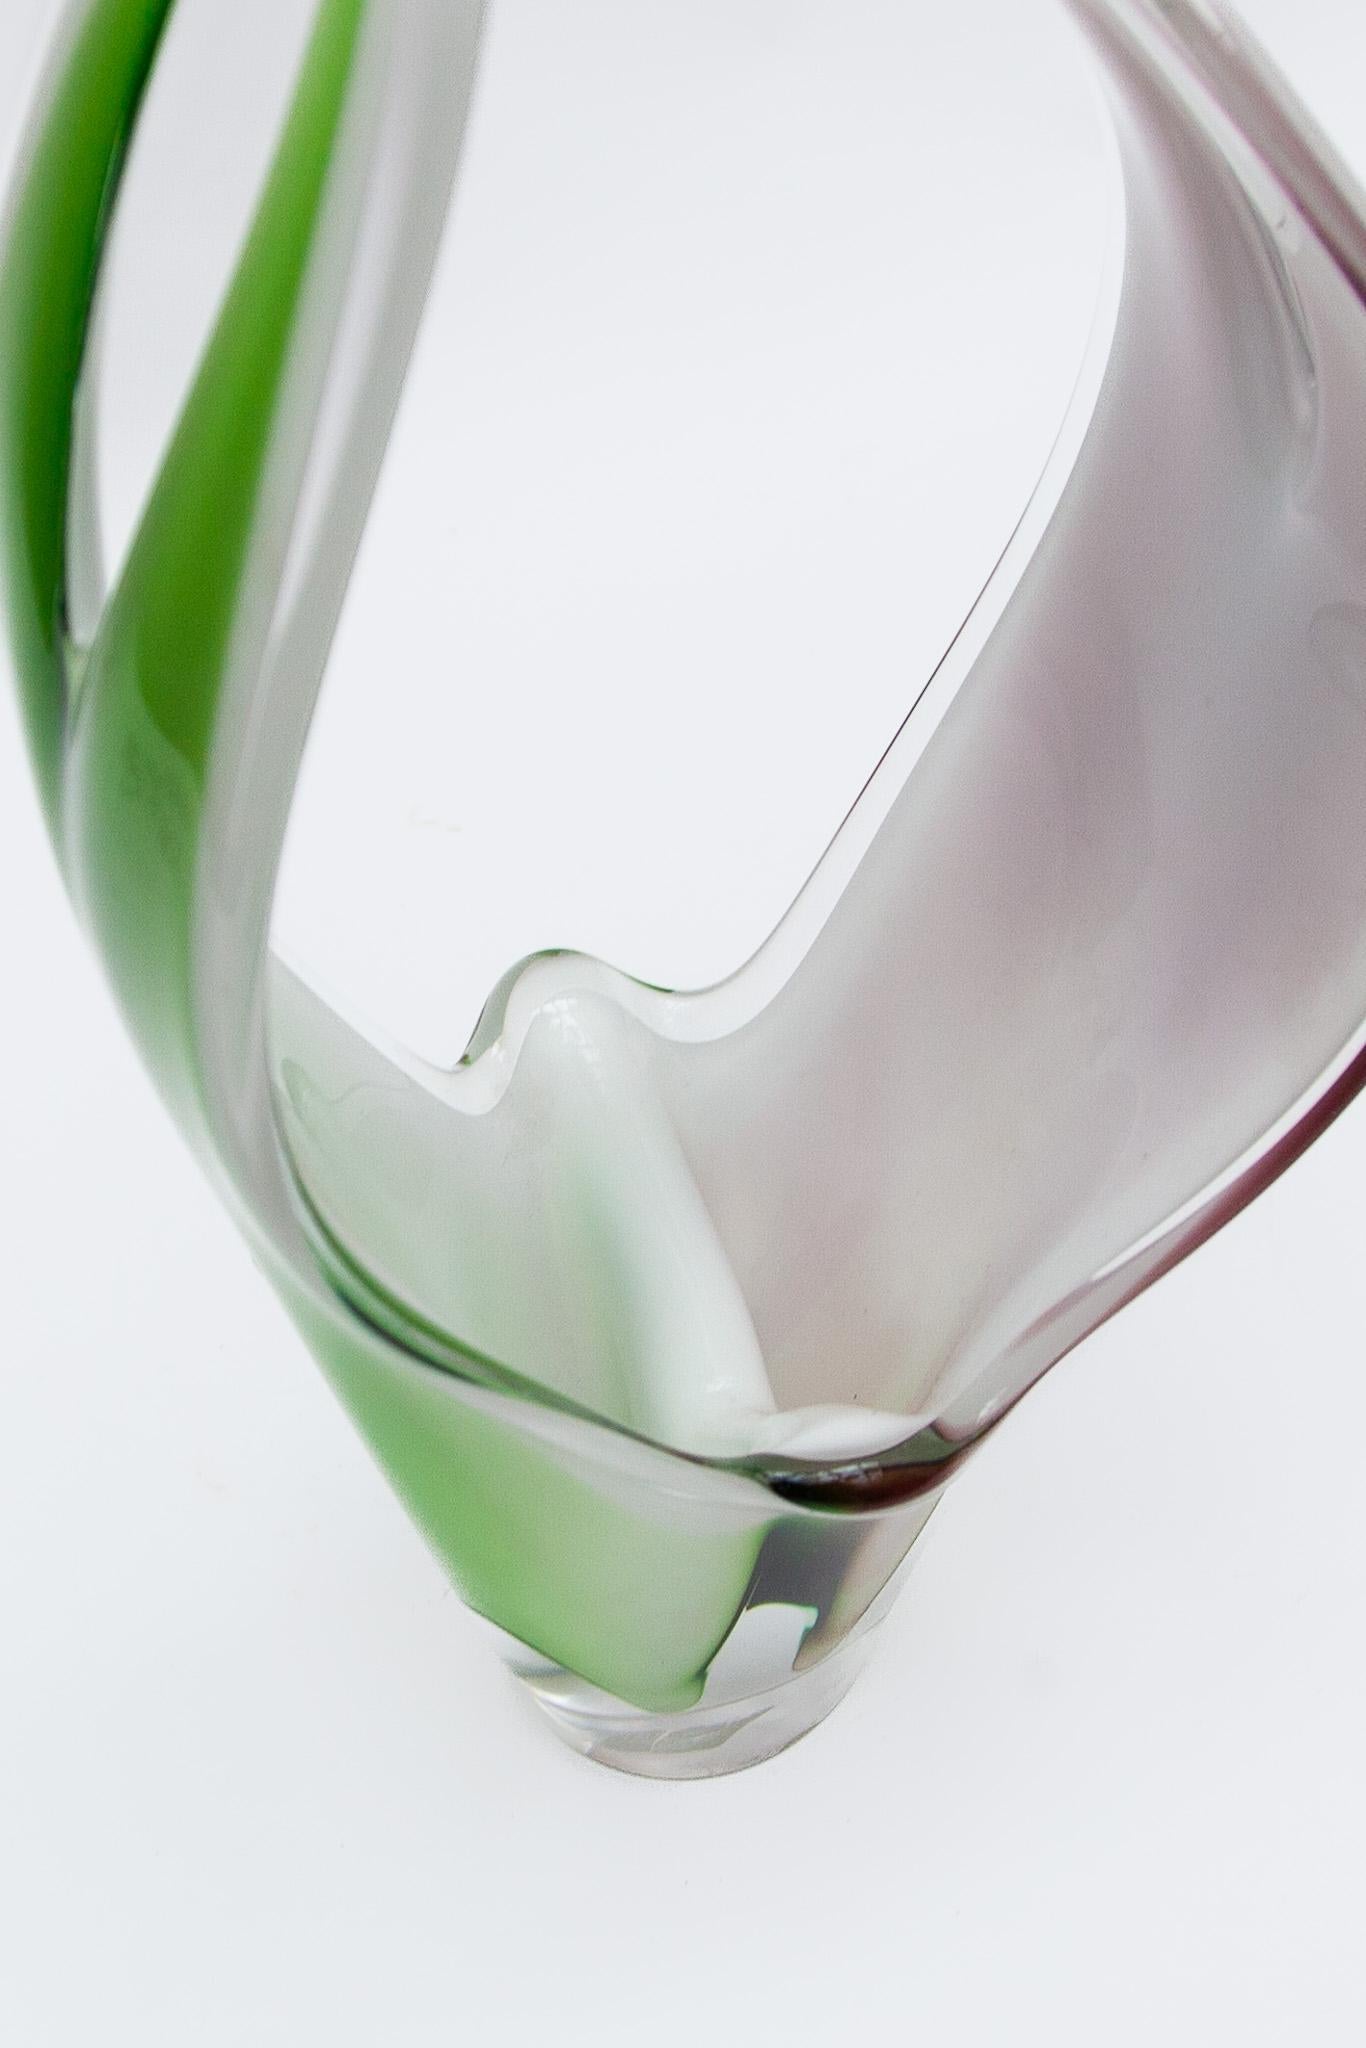 A beautiful model Coquille art glass vase sculpture from 1957, designed by Paul Kedelv at Flygsfors glassworks in Sweden. It is 37 cm high and in excellent condition.Featured mout-blown glass in three colors white opal, purple and green.